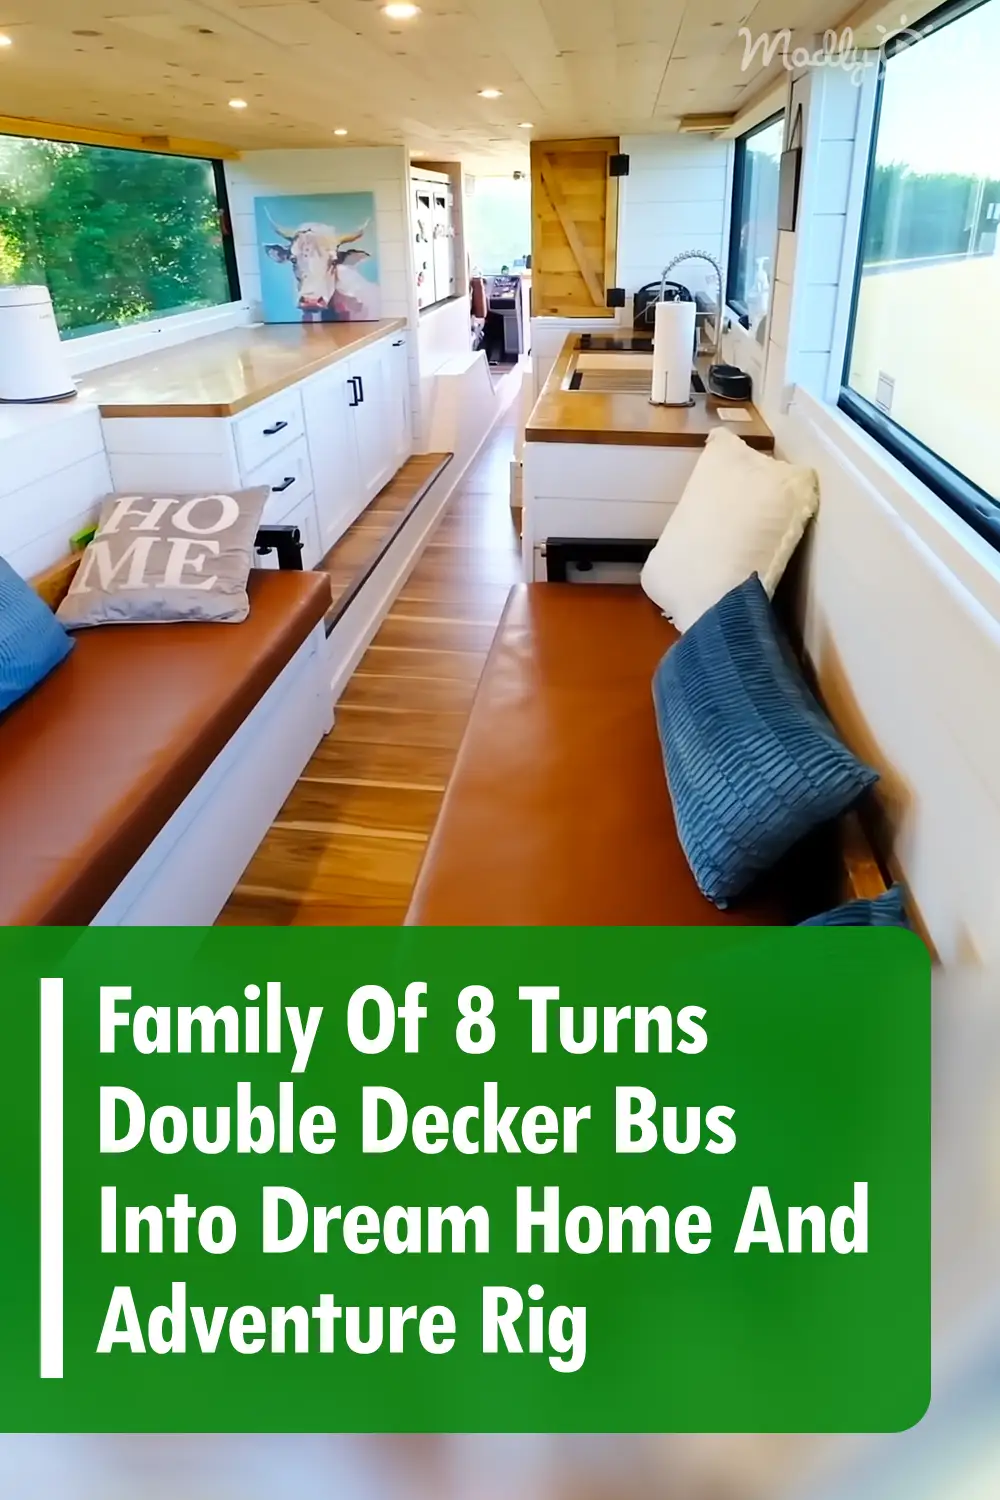 Family Of 8 Turns Double Decker Bus Into Dream Home And Adventure Rig